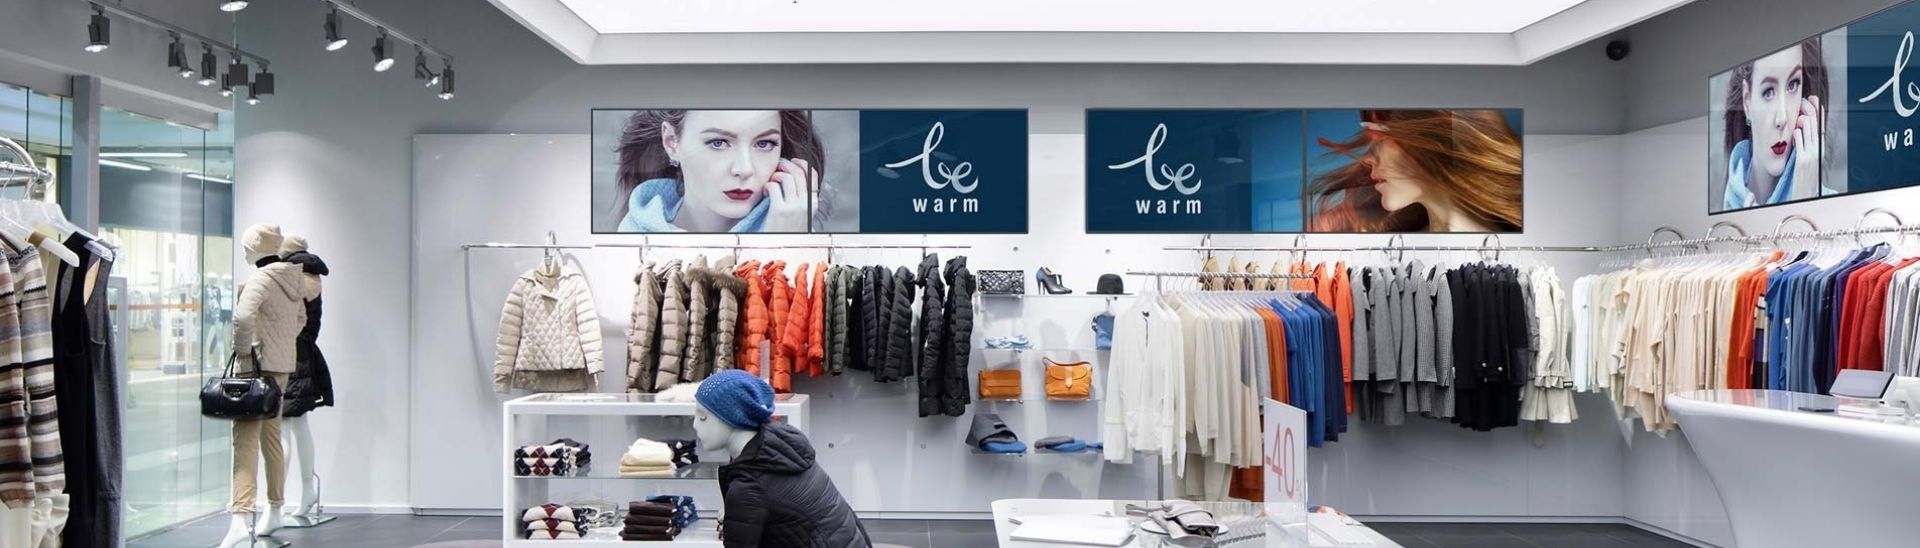 digital-signage-in-clothes-stores